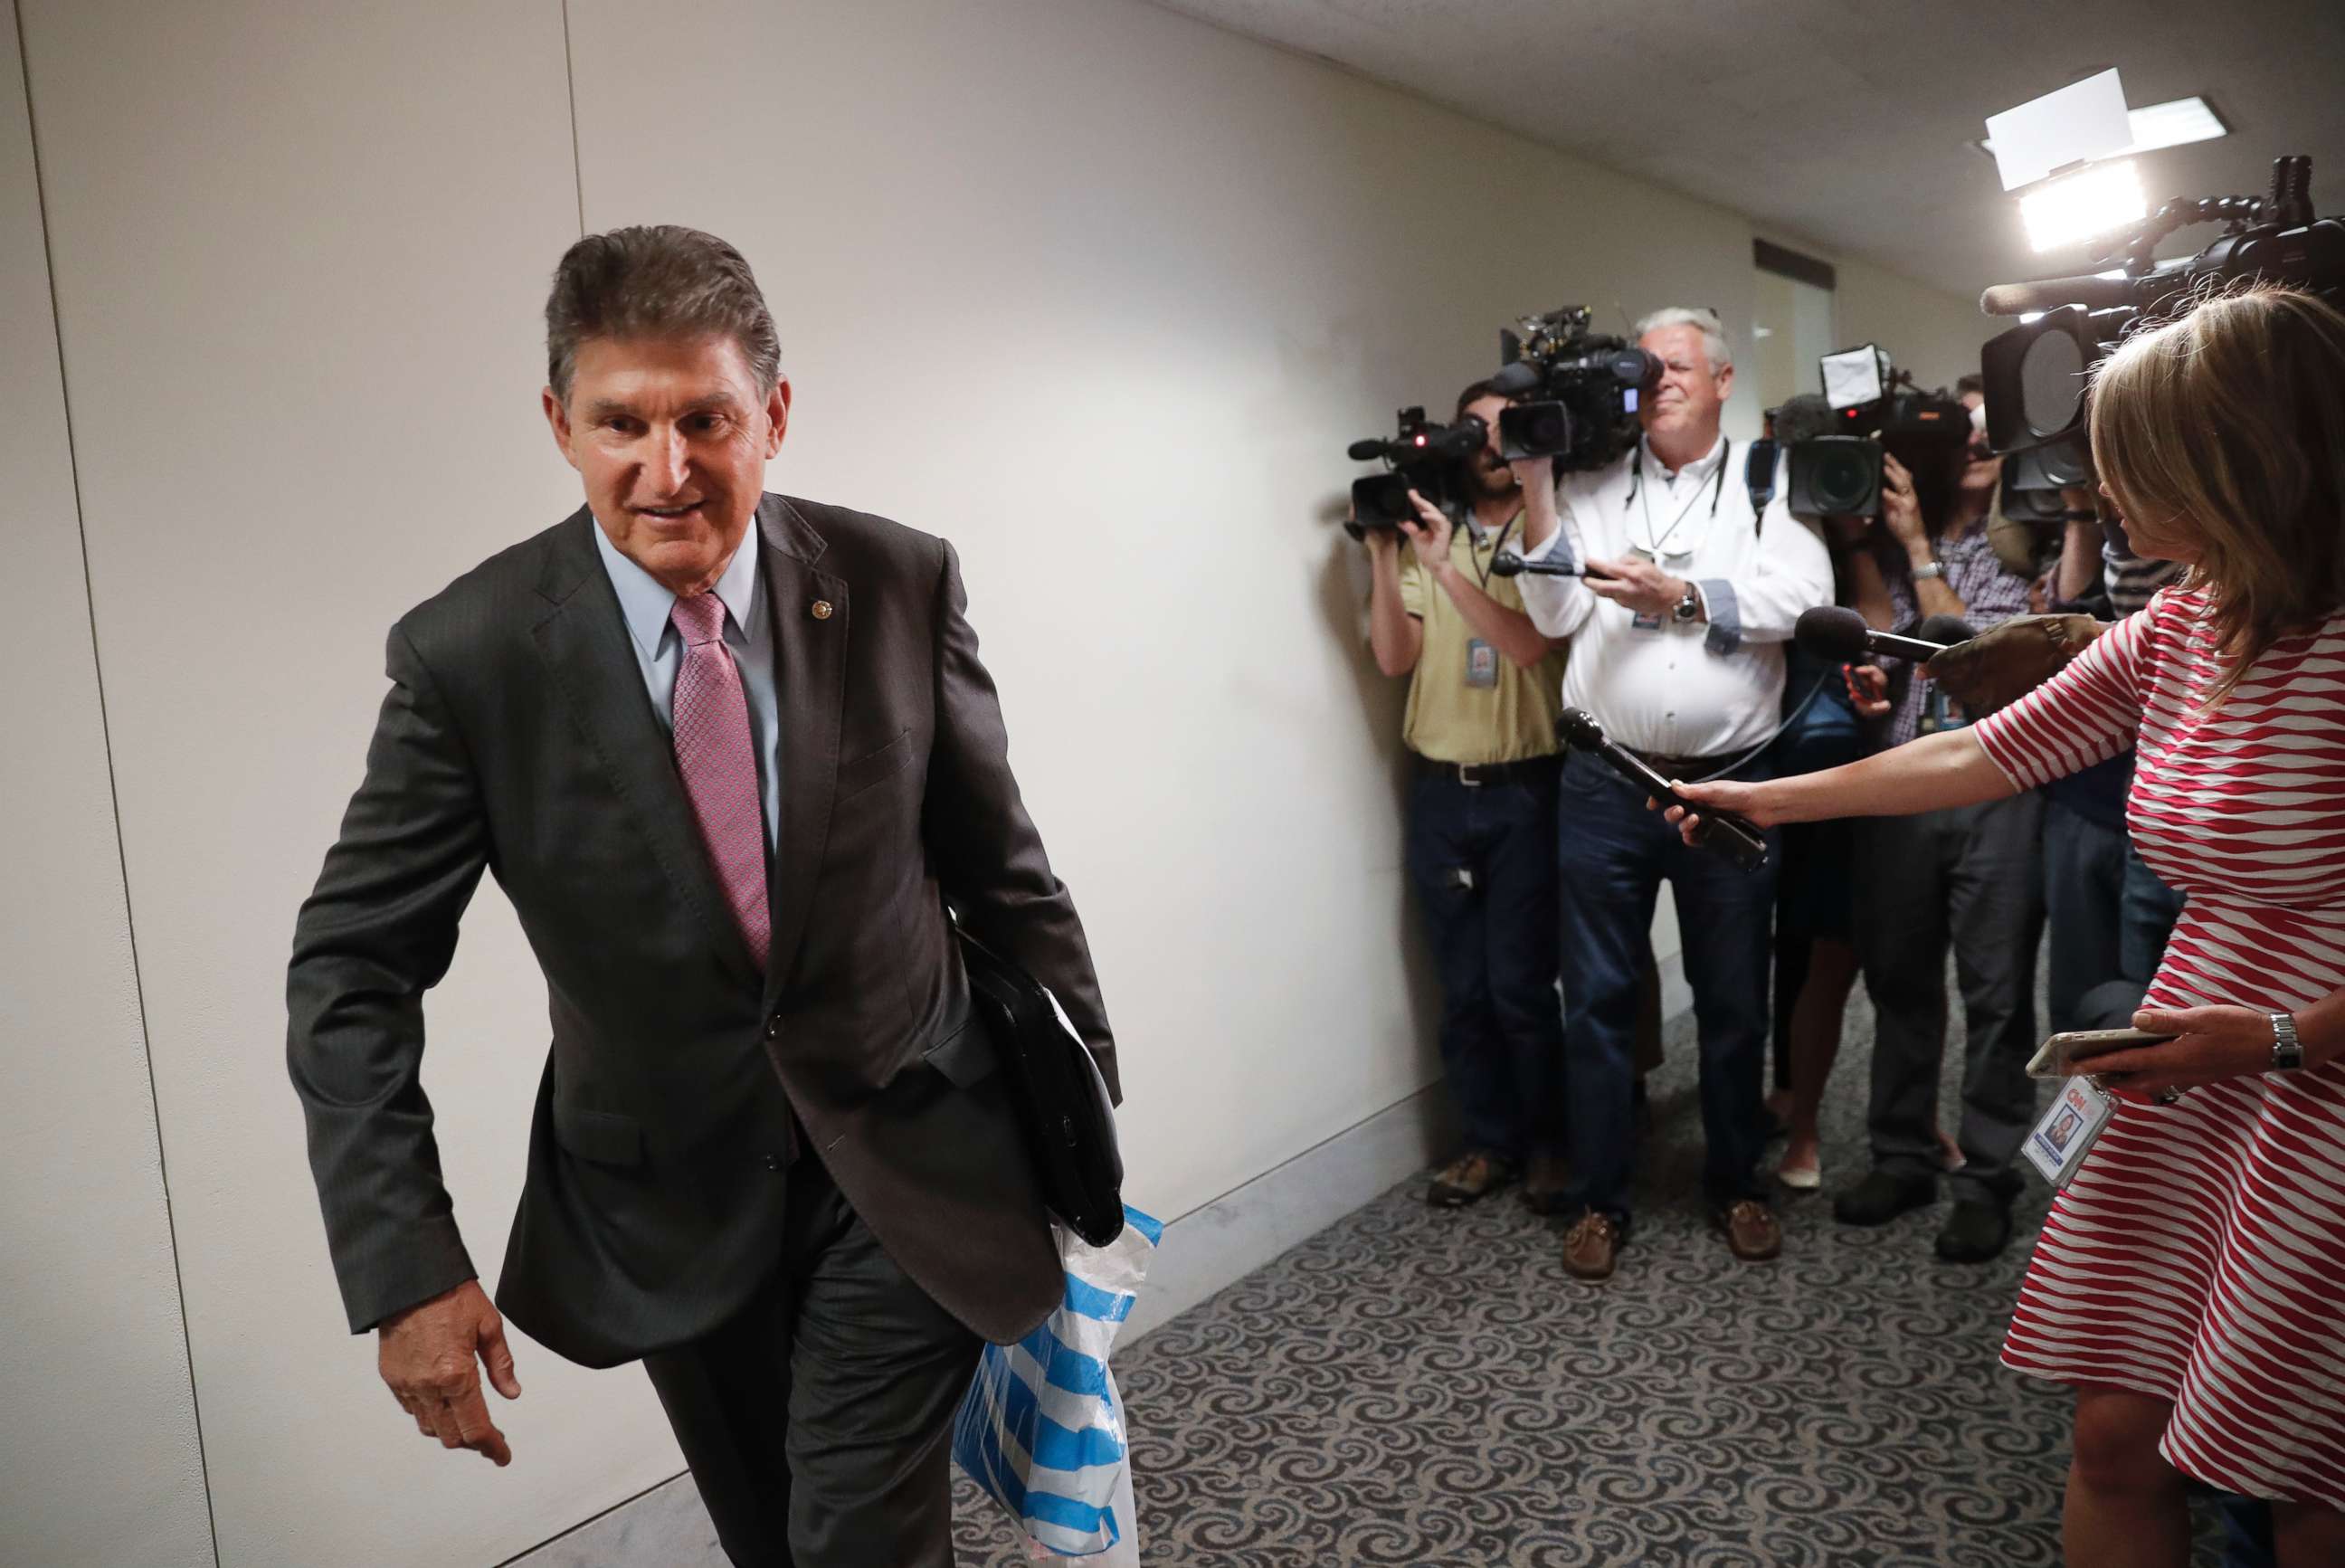 PHOTO: Sen. Joe Manchin, turns to walk away after speaking to members of the media prior to his meeting with CIA Director Nominee Gina Haspel, on Capitol Hill in Washington, May 7, 2018.